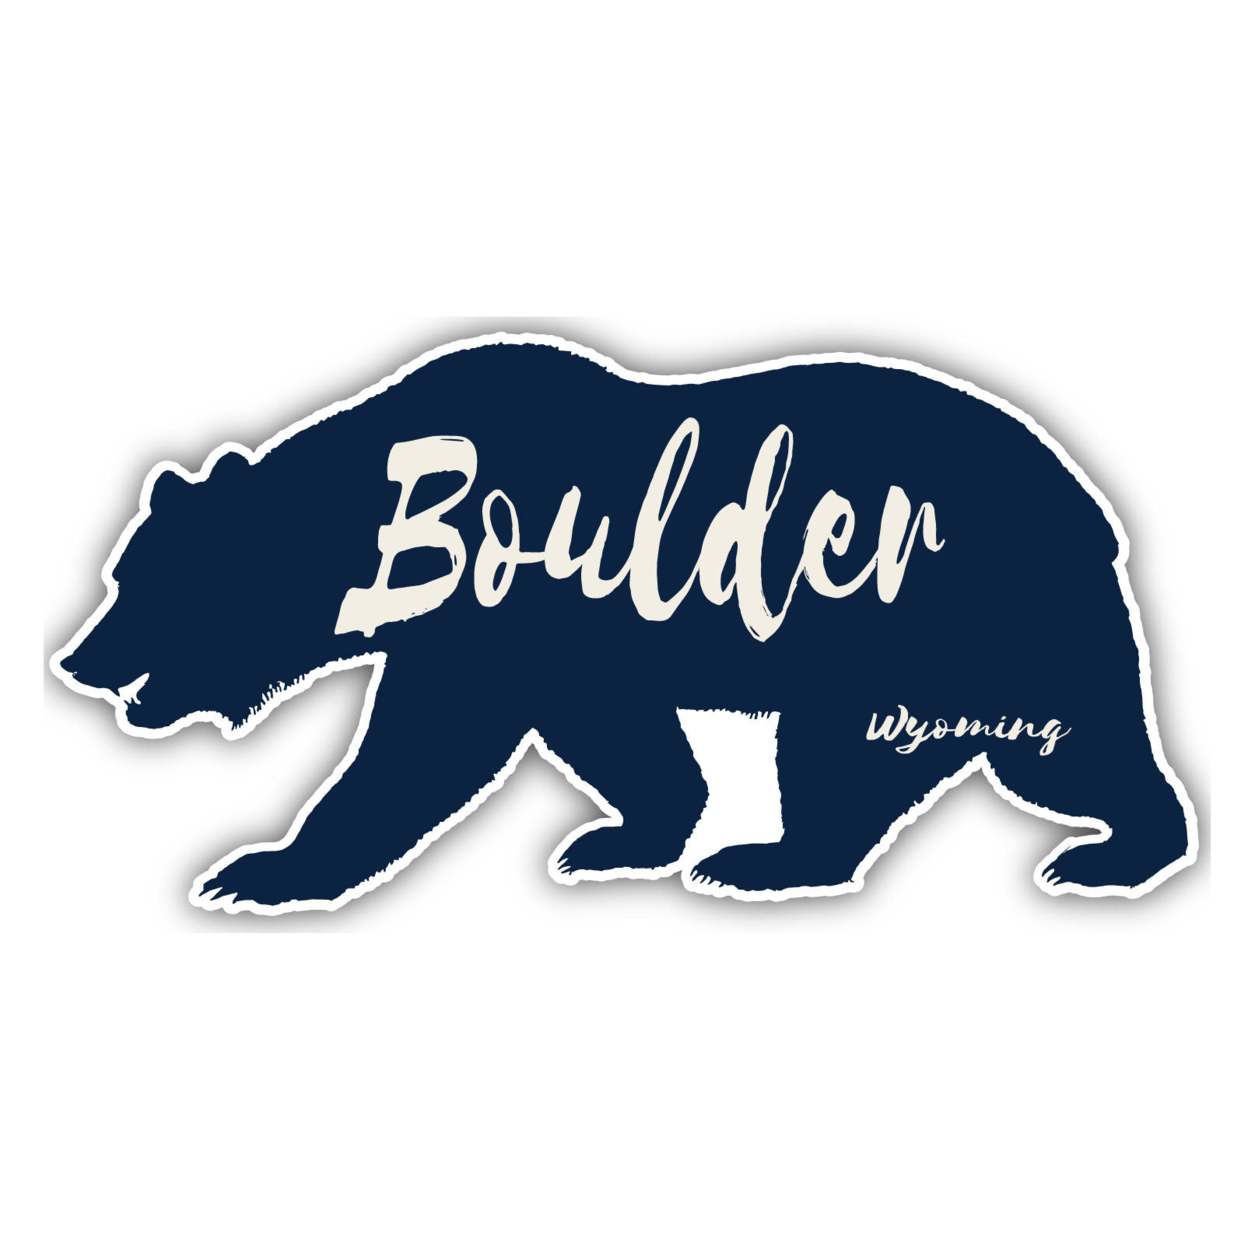 Boulder Wyoming Souvenir Decorative Stickers (Choose Theme And Size) - 4-Pack, 6-Inch, Bear